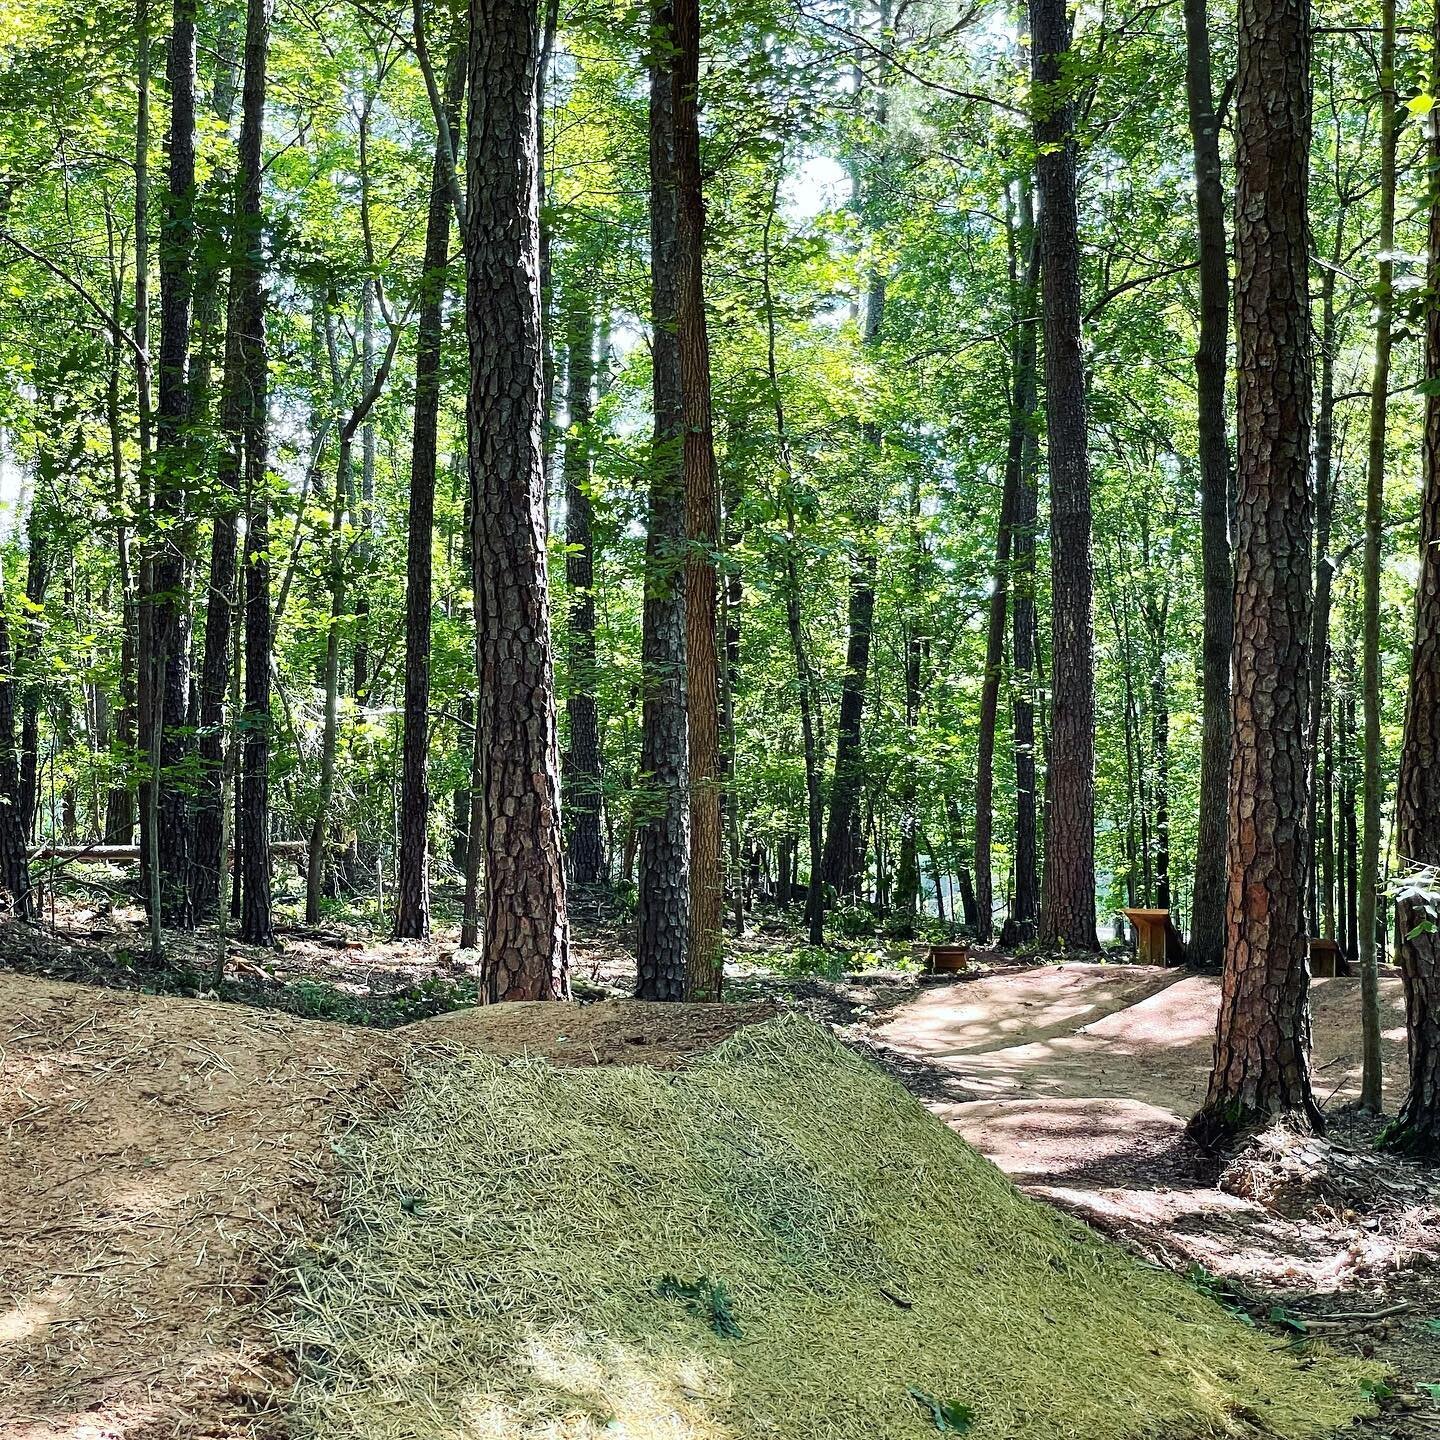 We always enjoy trailbuilding for our friends @torc_nc . Our team has been working at Lake Crabtree County Park located in Cary, NC. Trail &ldquo;E&rdquo; just got a major re-build with a re-route to incorporate fresh fun into the trail. This single 